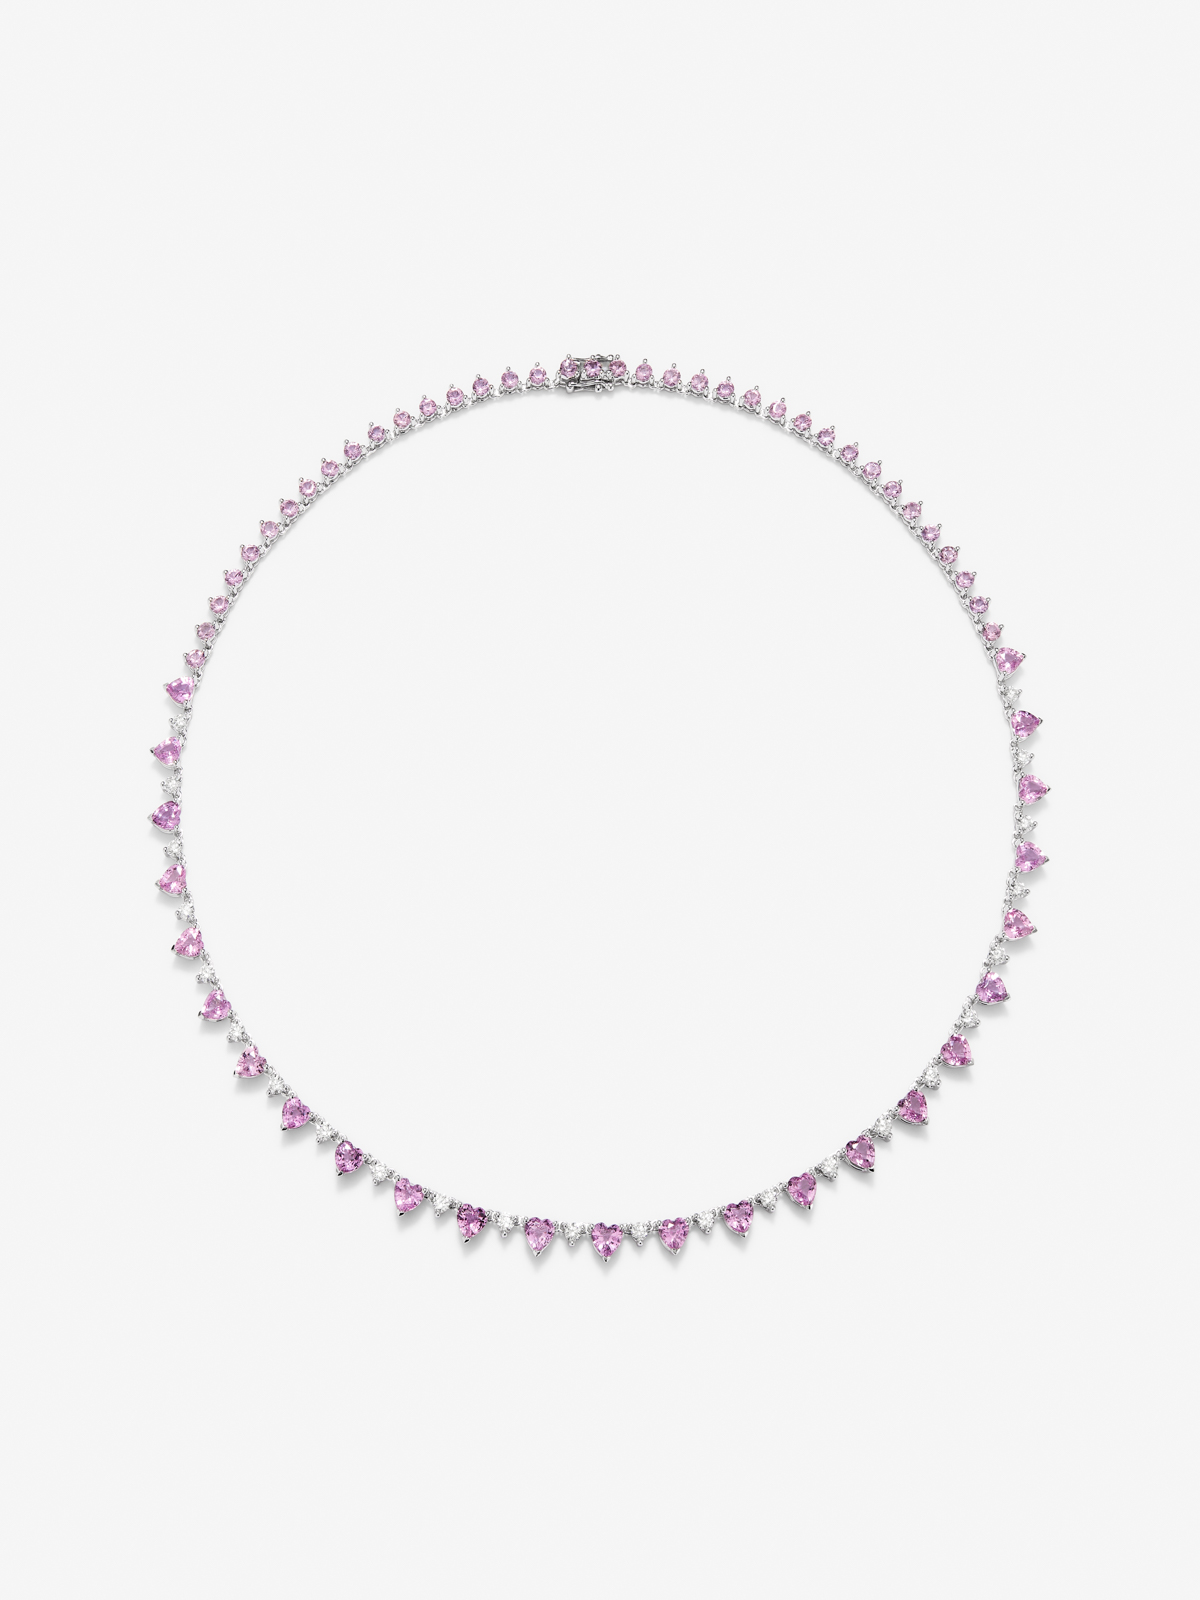 18K white gold necklace with pink sapphires in bright size and 15.31 cts and diamonds in bright 1.89 cts size